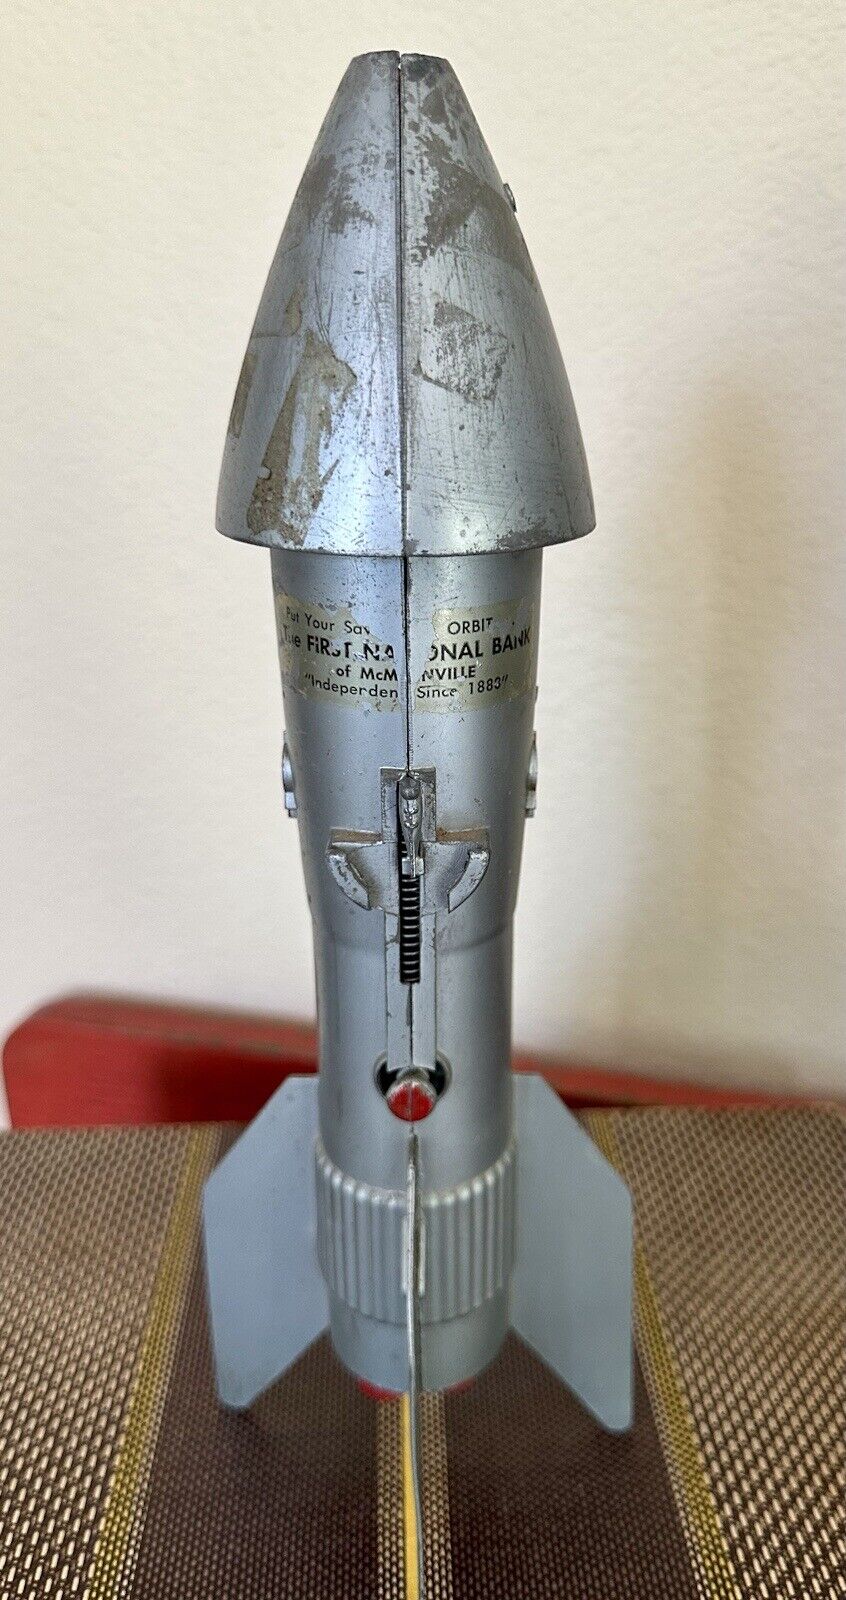 1950’s Berzac Rocket Mechanical Coin Bank - 1st Nat. Bank of McMinnville, OR